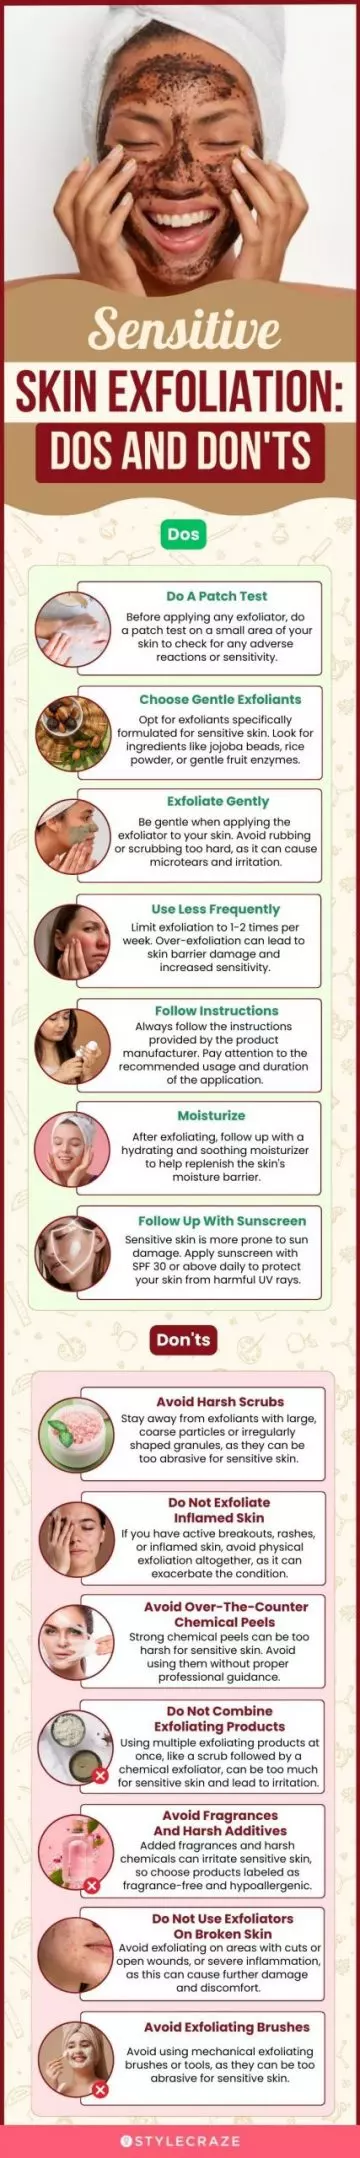 Sensitive Skin Exfoliation: Dos And Don'ts (infographic)